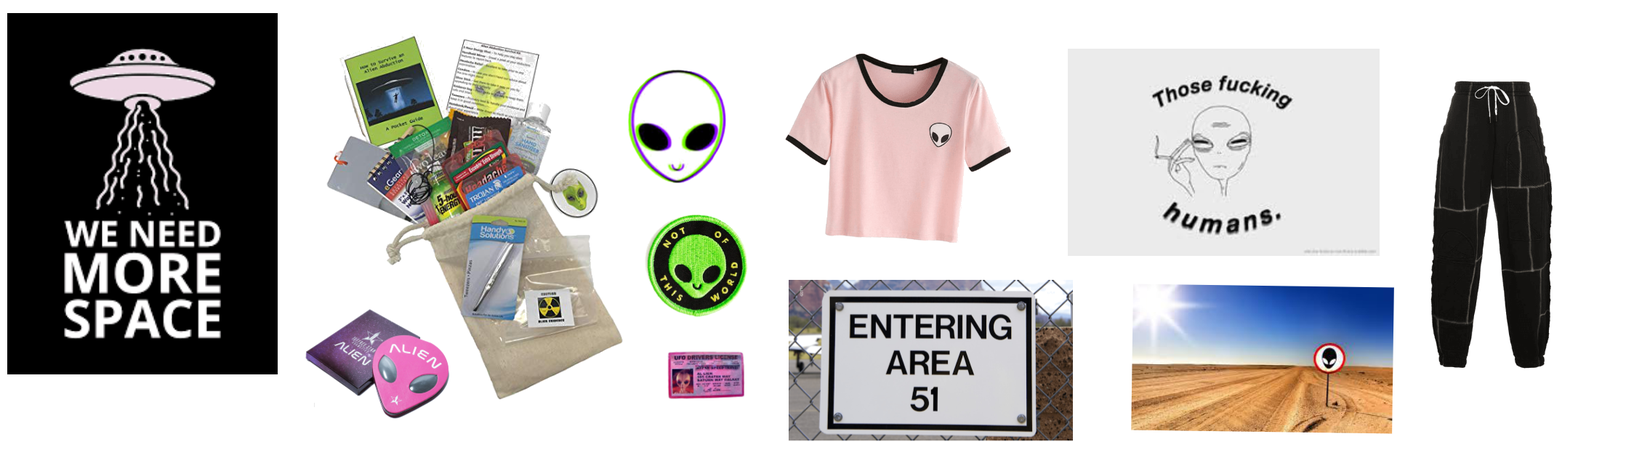 storming area 51